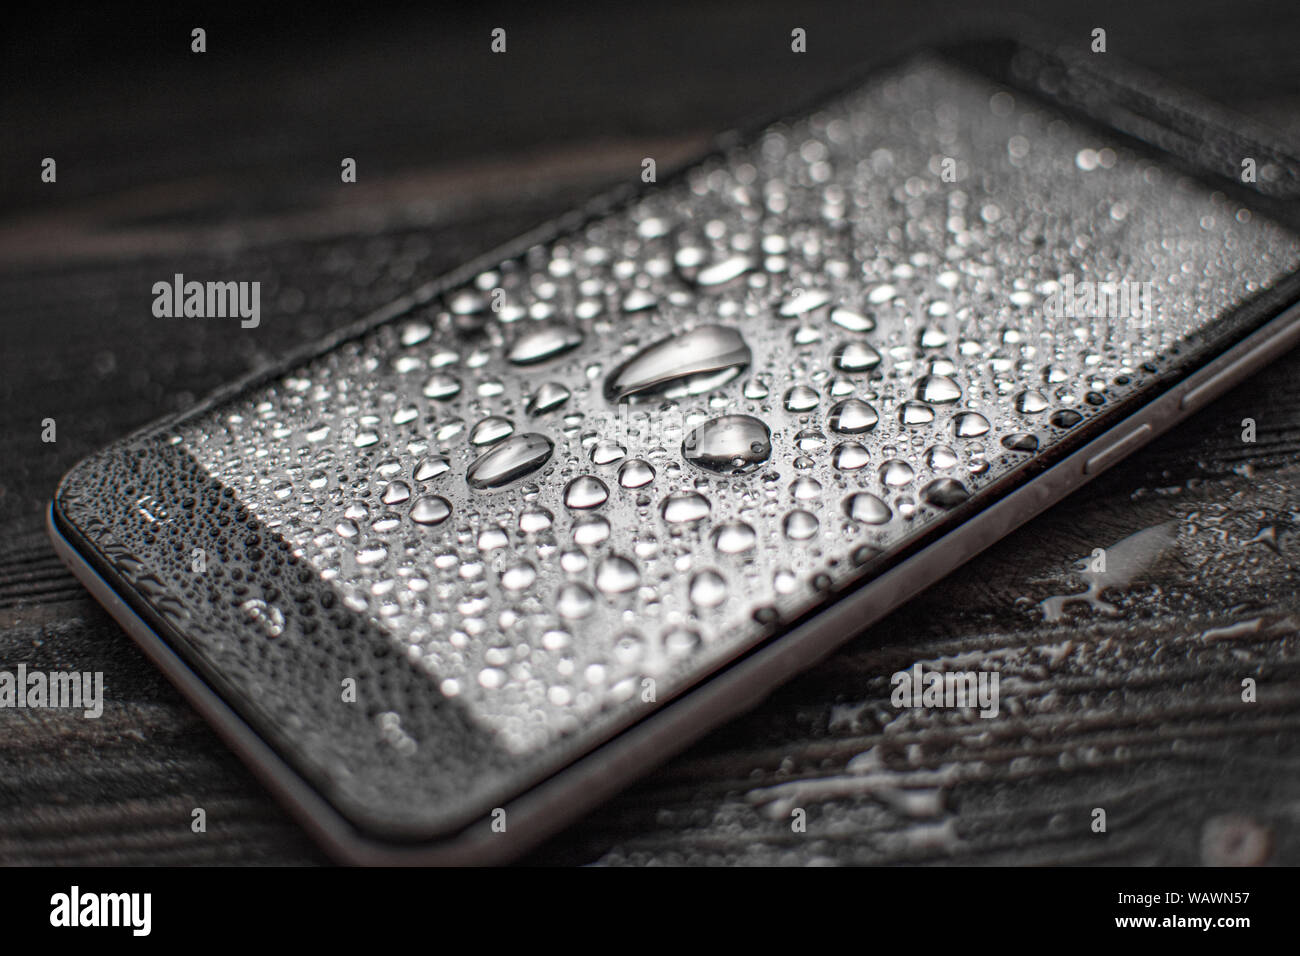 Liquid Water Drops On Glass Of Smartphone On Wooden Desk Surface